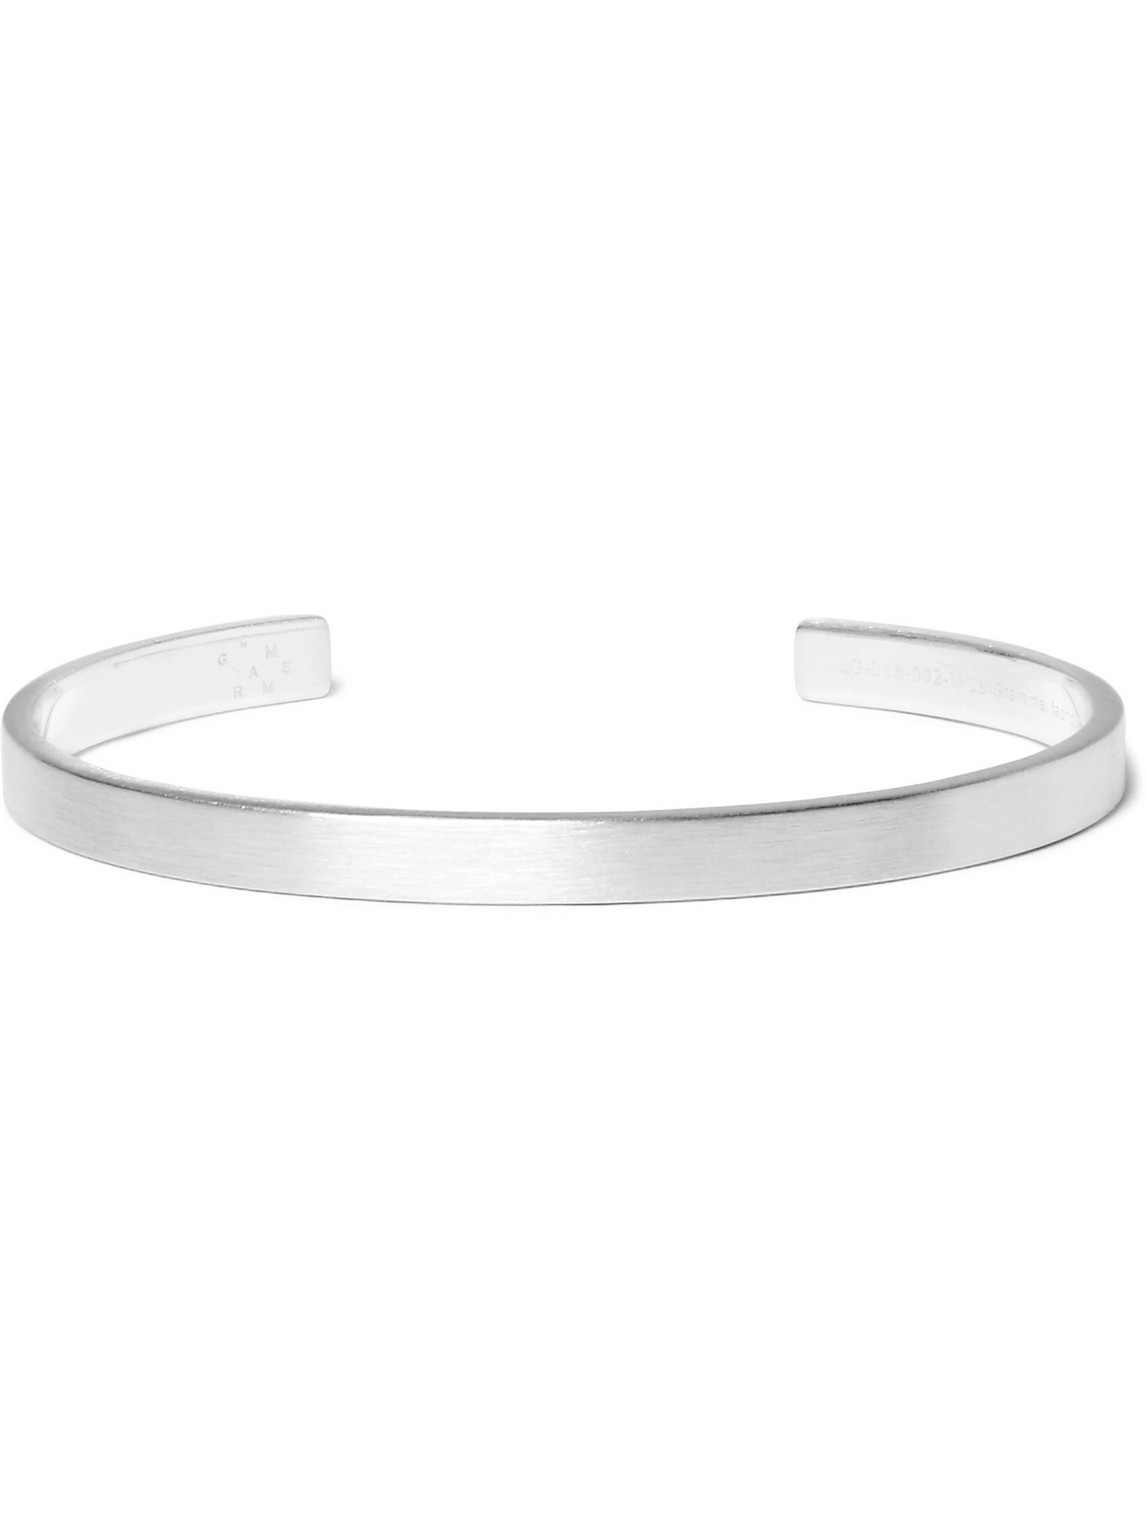 Le Gramme Le 15 Brushed Sterling Silver Cuff